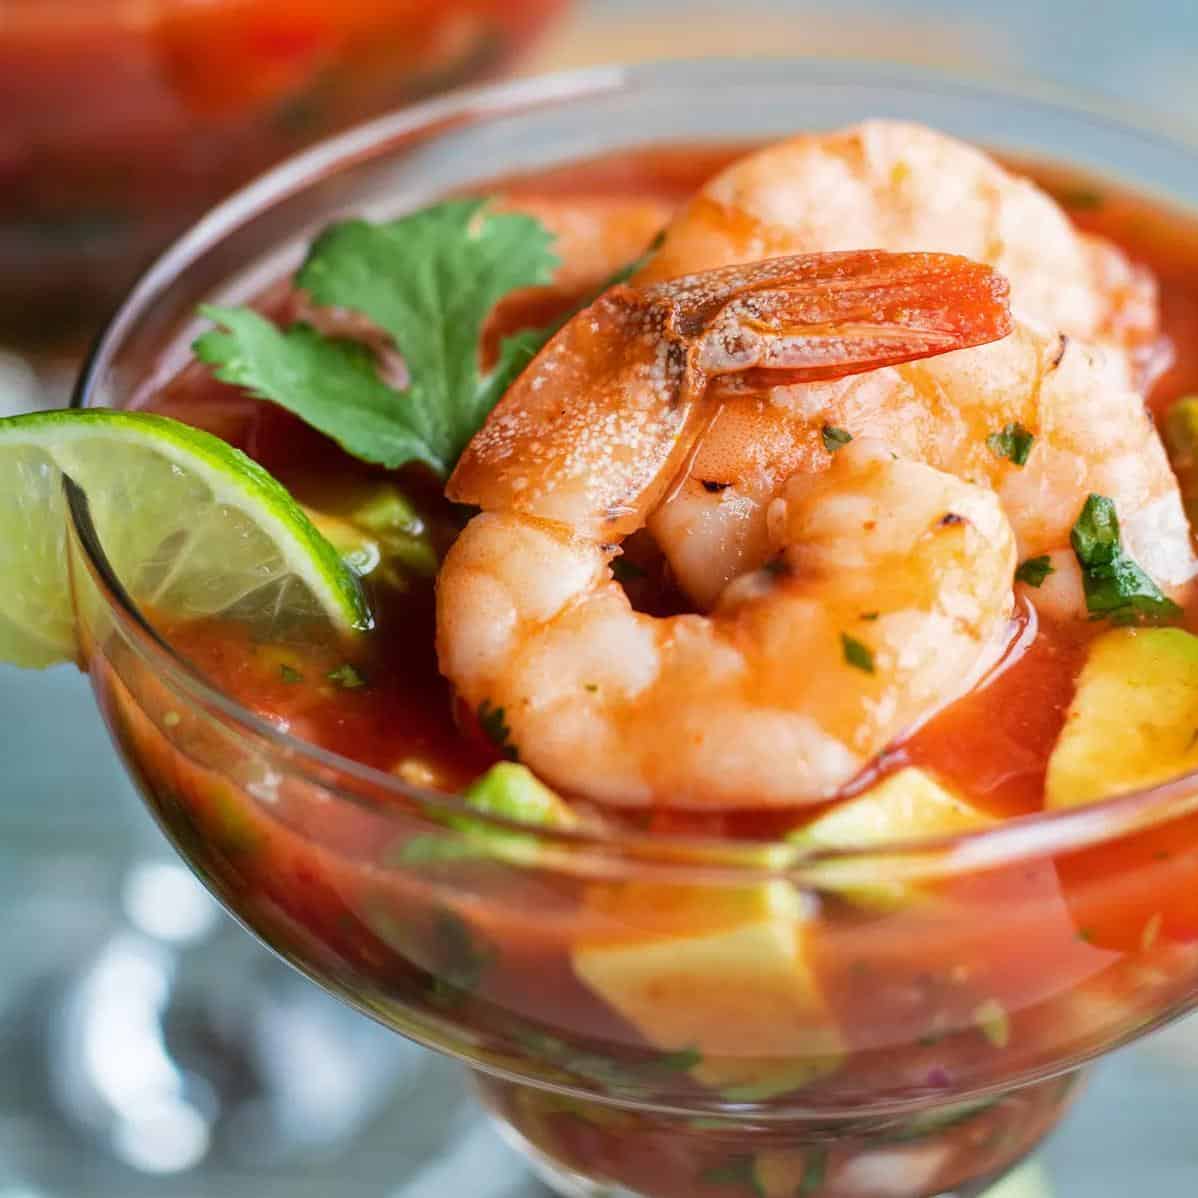  Enjoy this dish as a light and refreshing appetizer or a healthy and filling main course.